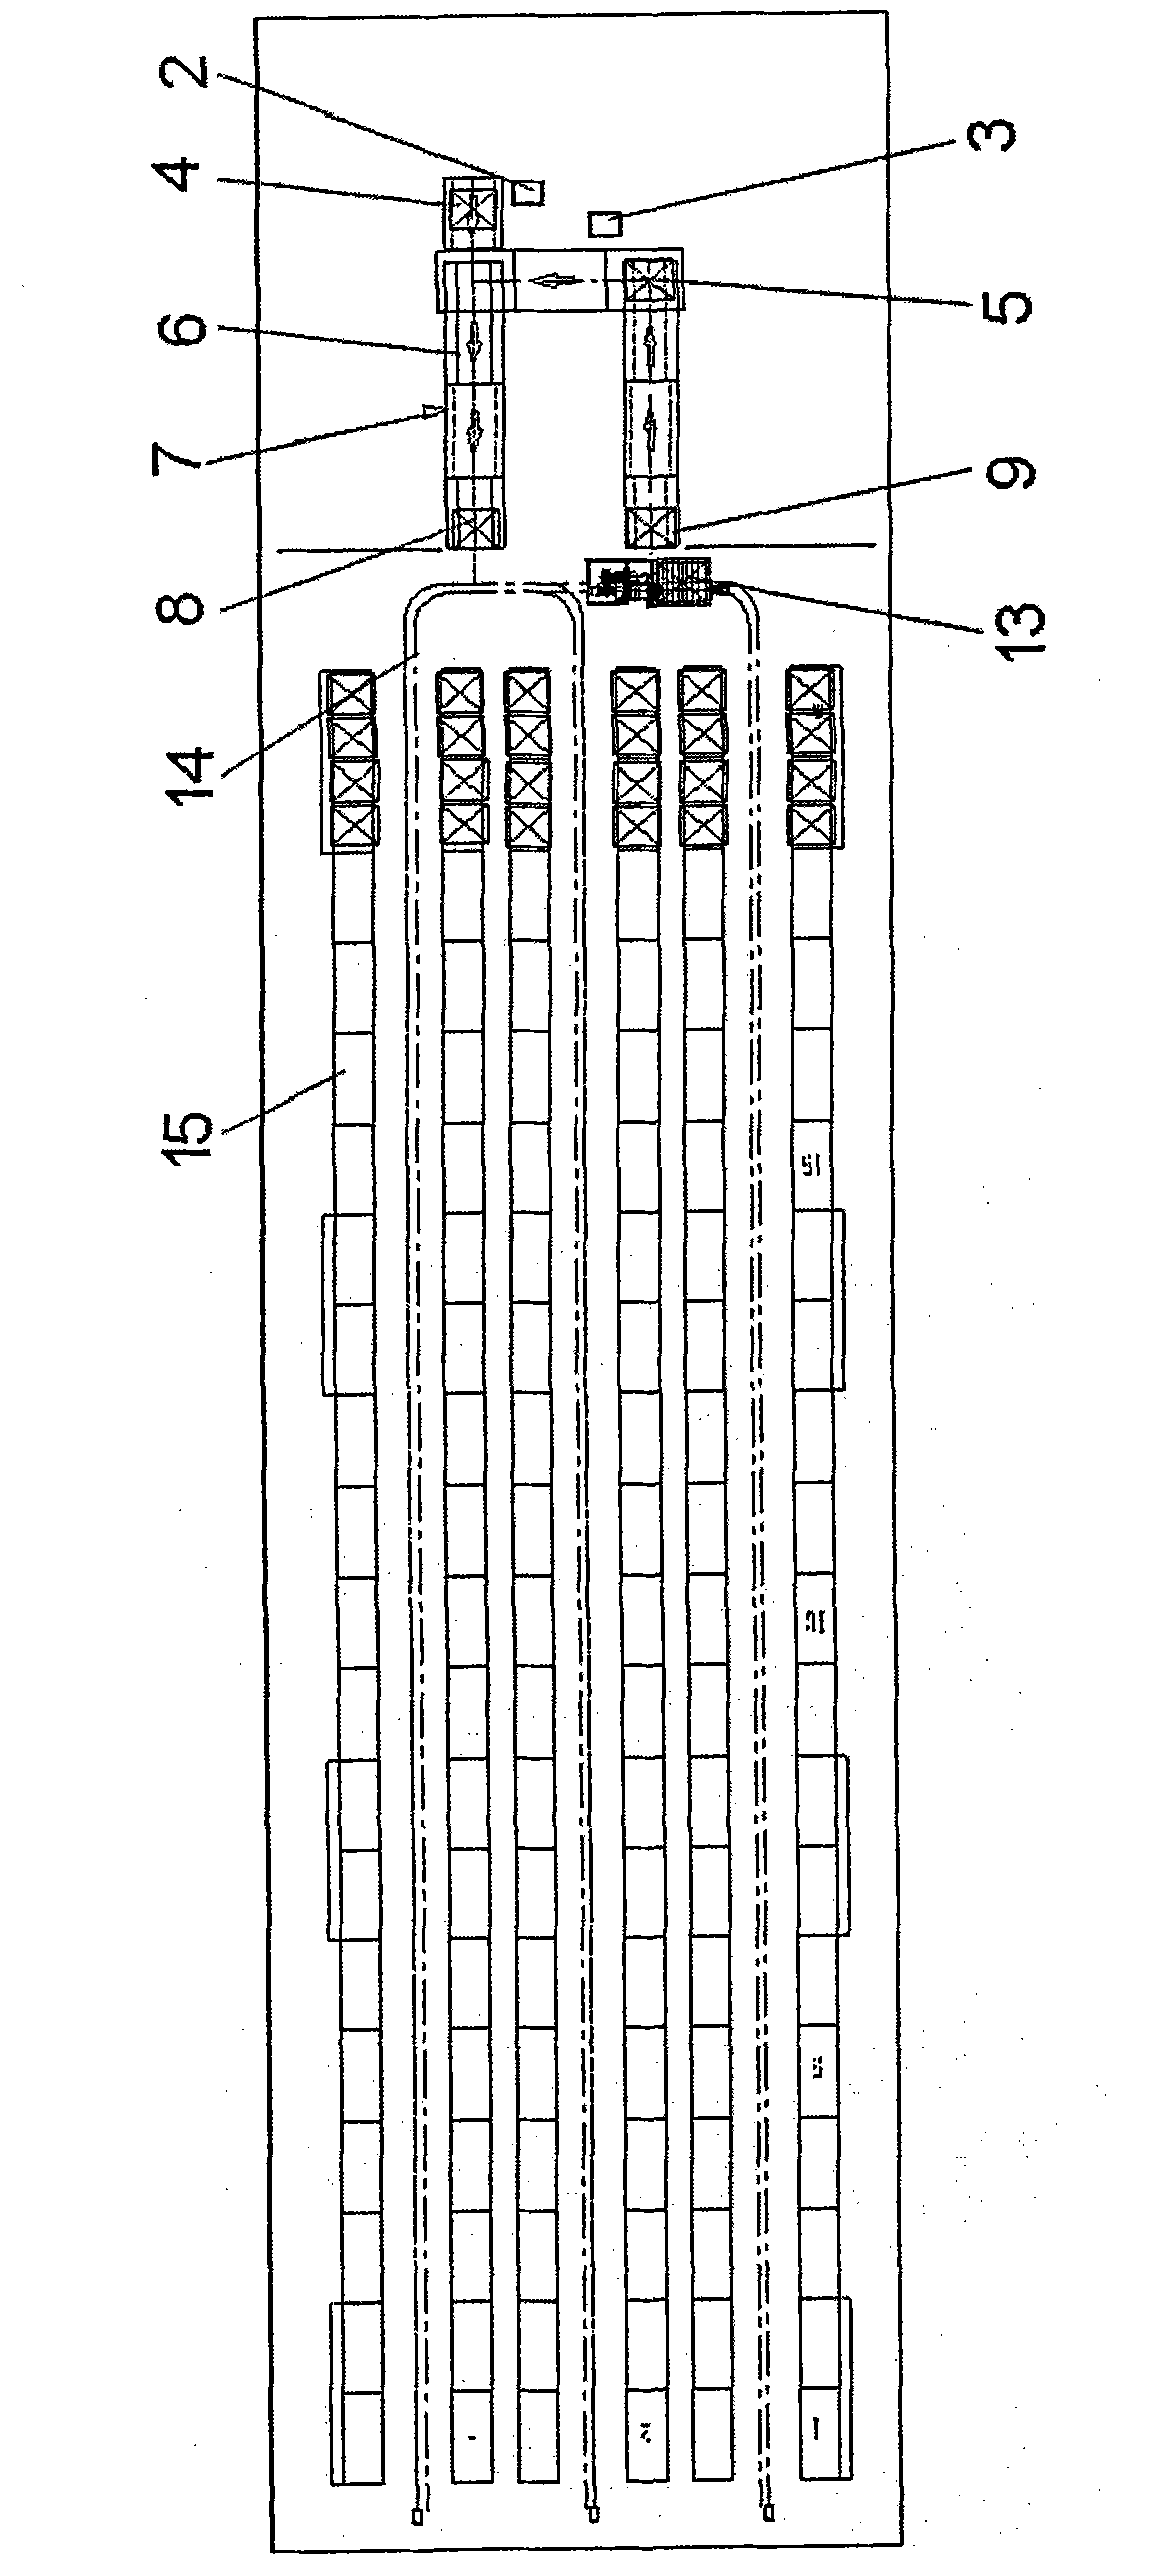 Automatic book storing and withdrawing device for library